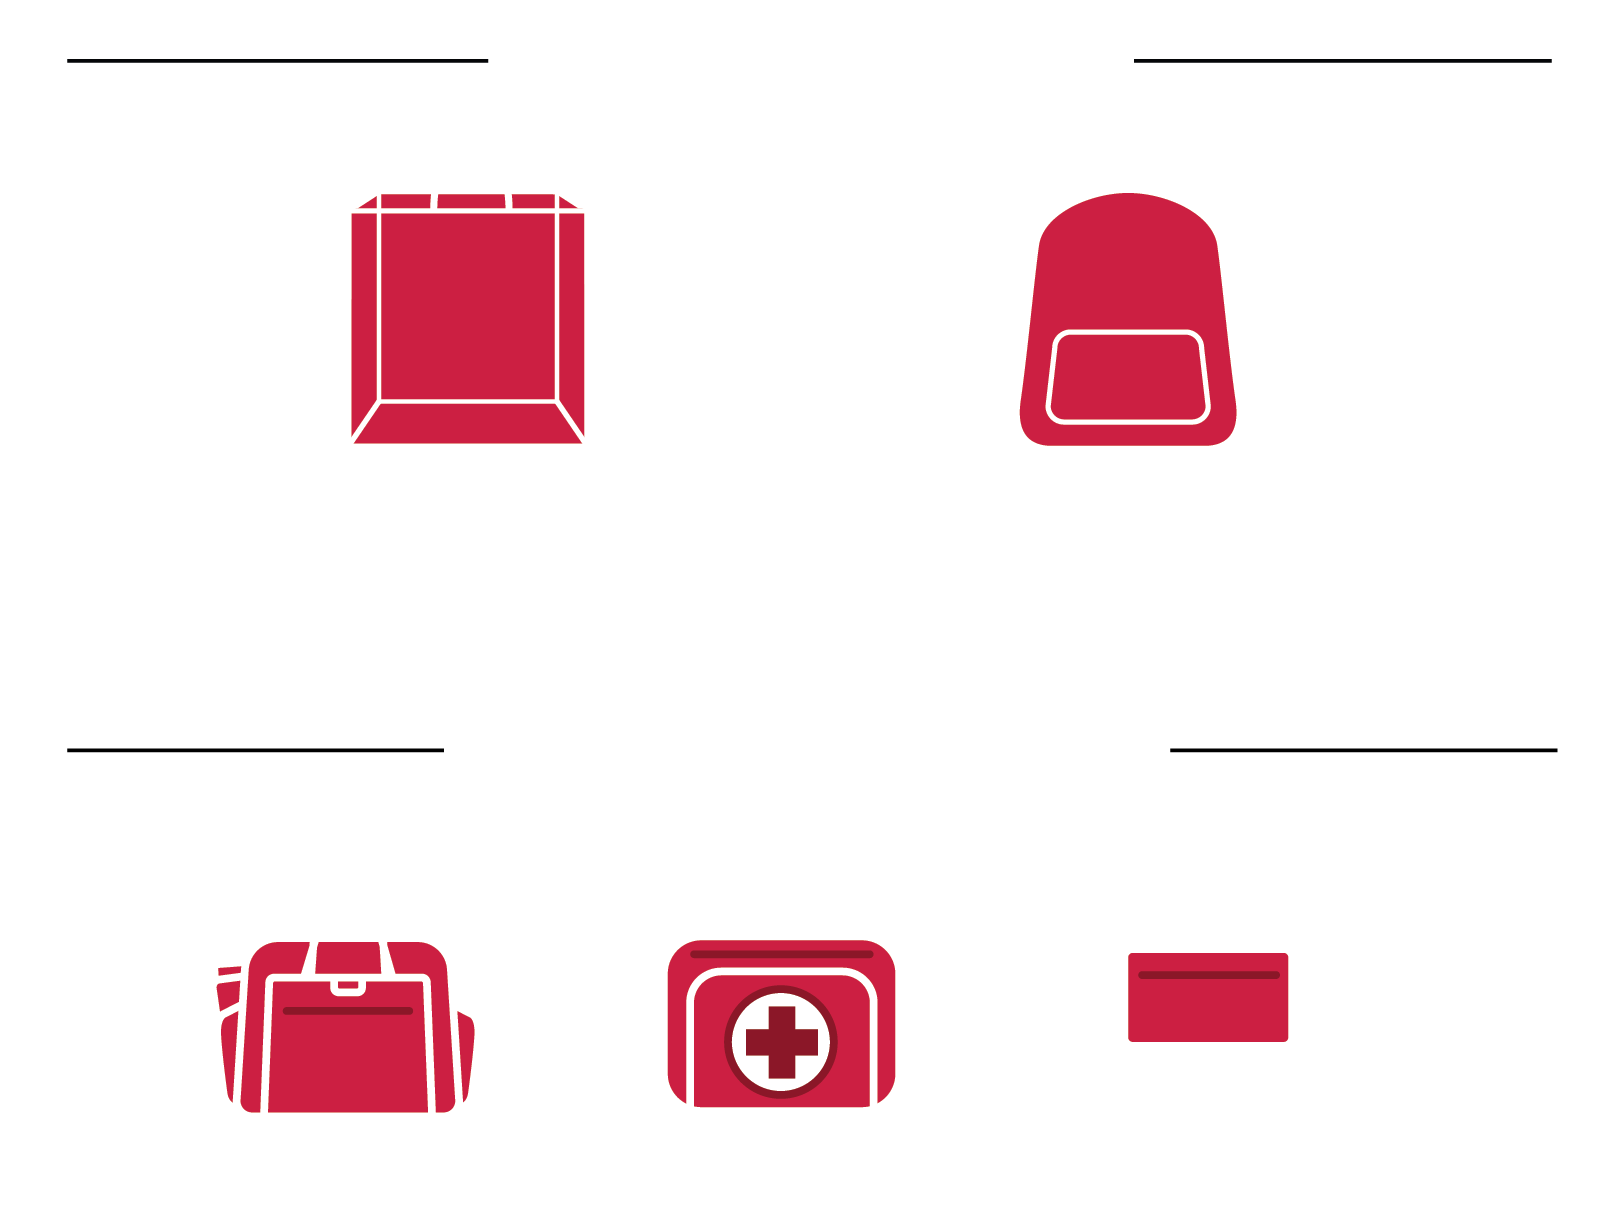 Description of allowed bags: clear tote bag, clear backpack and non-clear diaper bag, medical bag, and small clutch.